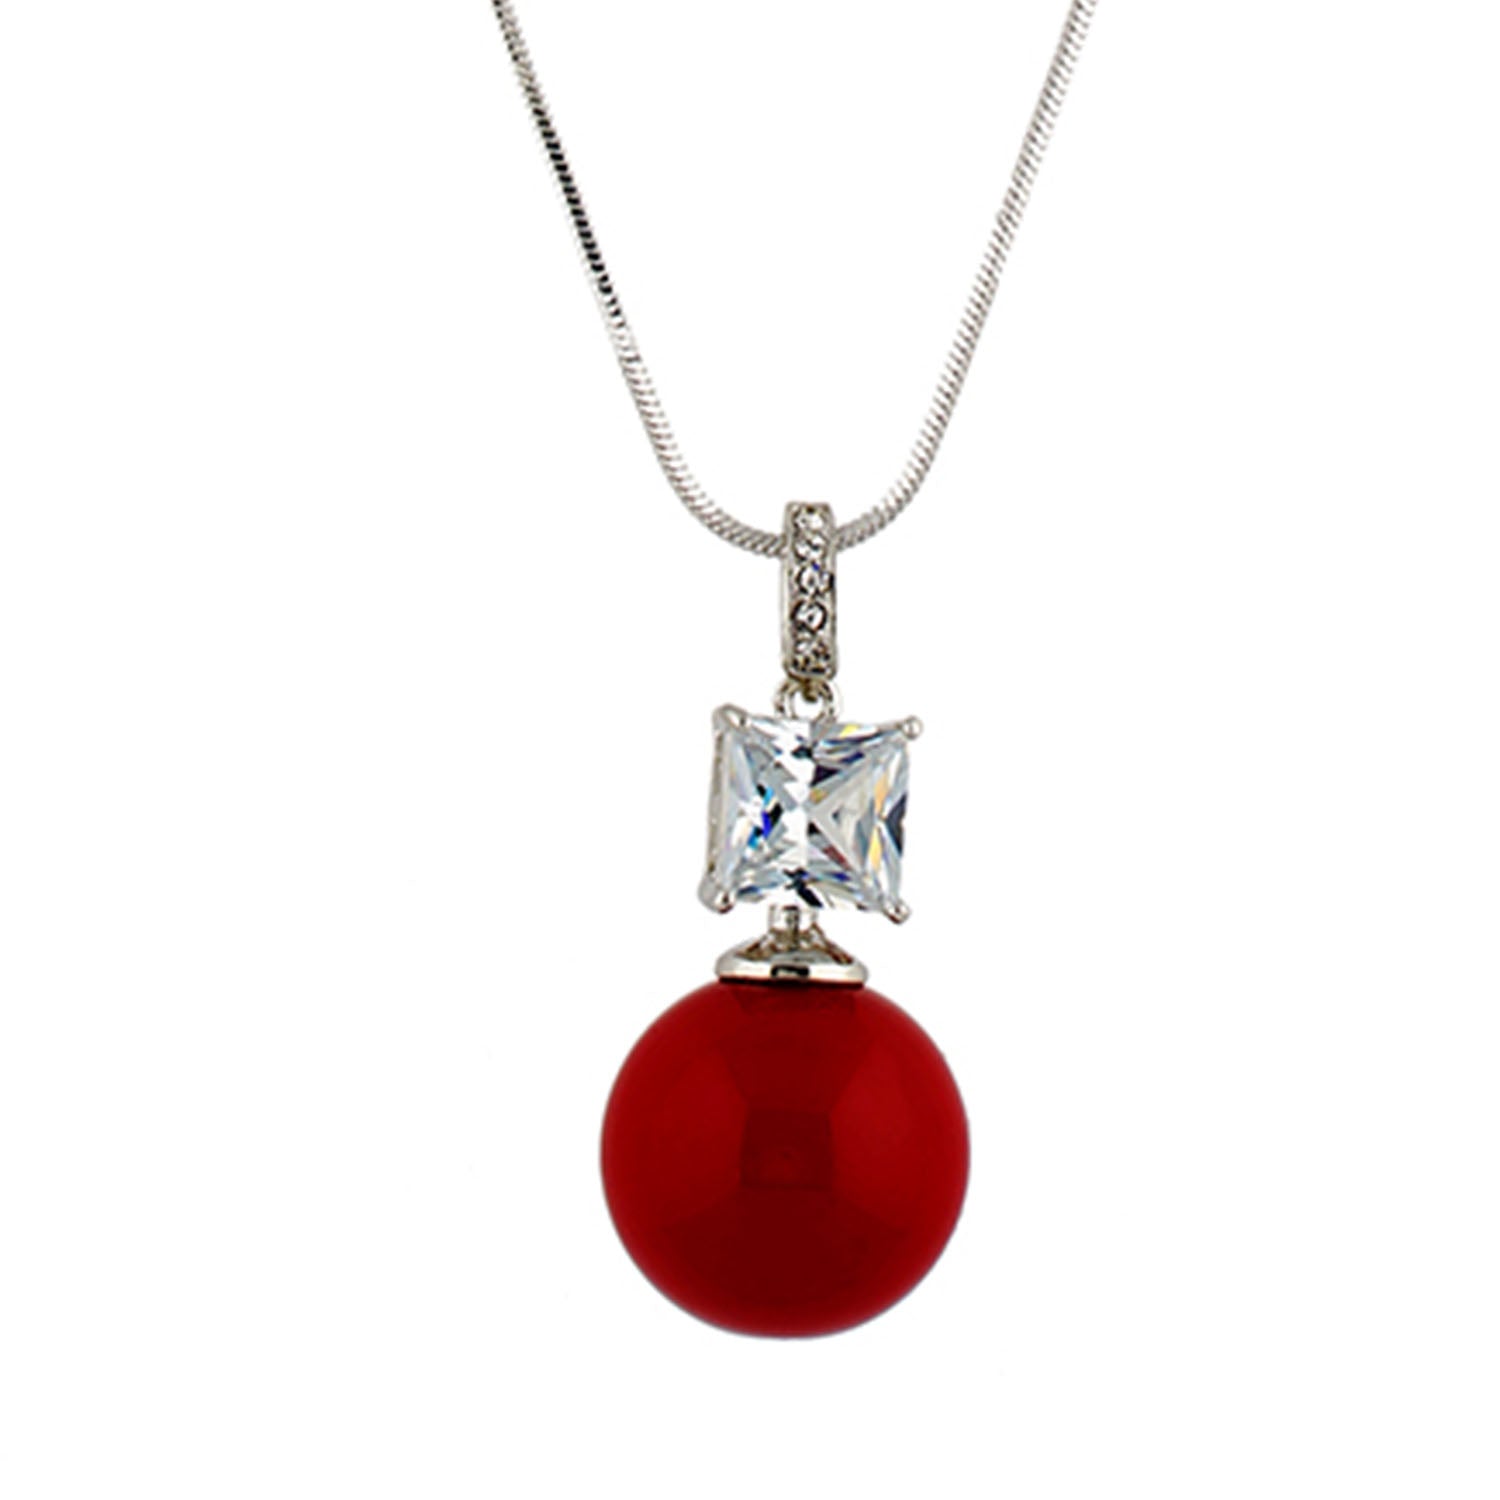 Grey Colour Red Ball Shape Alloy Pendant with Chain for Girls and Women